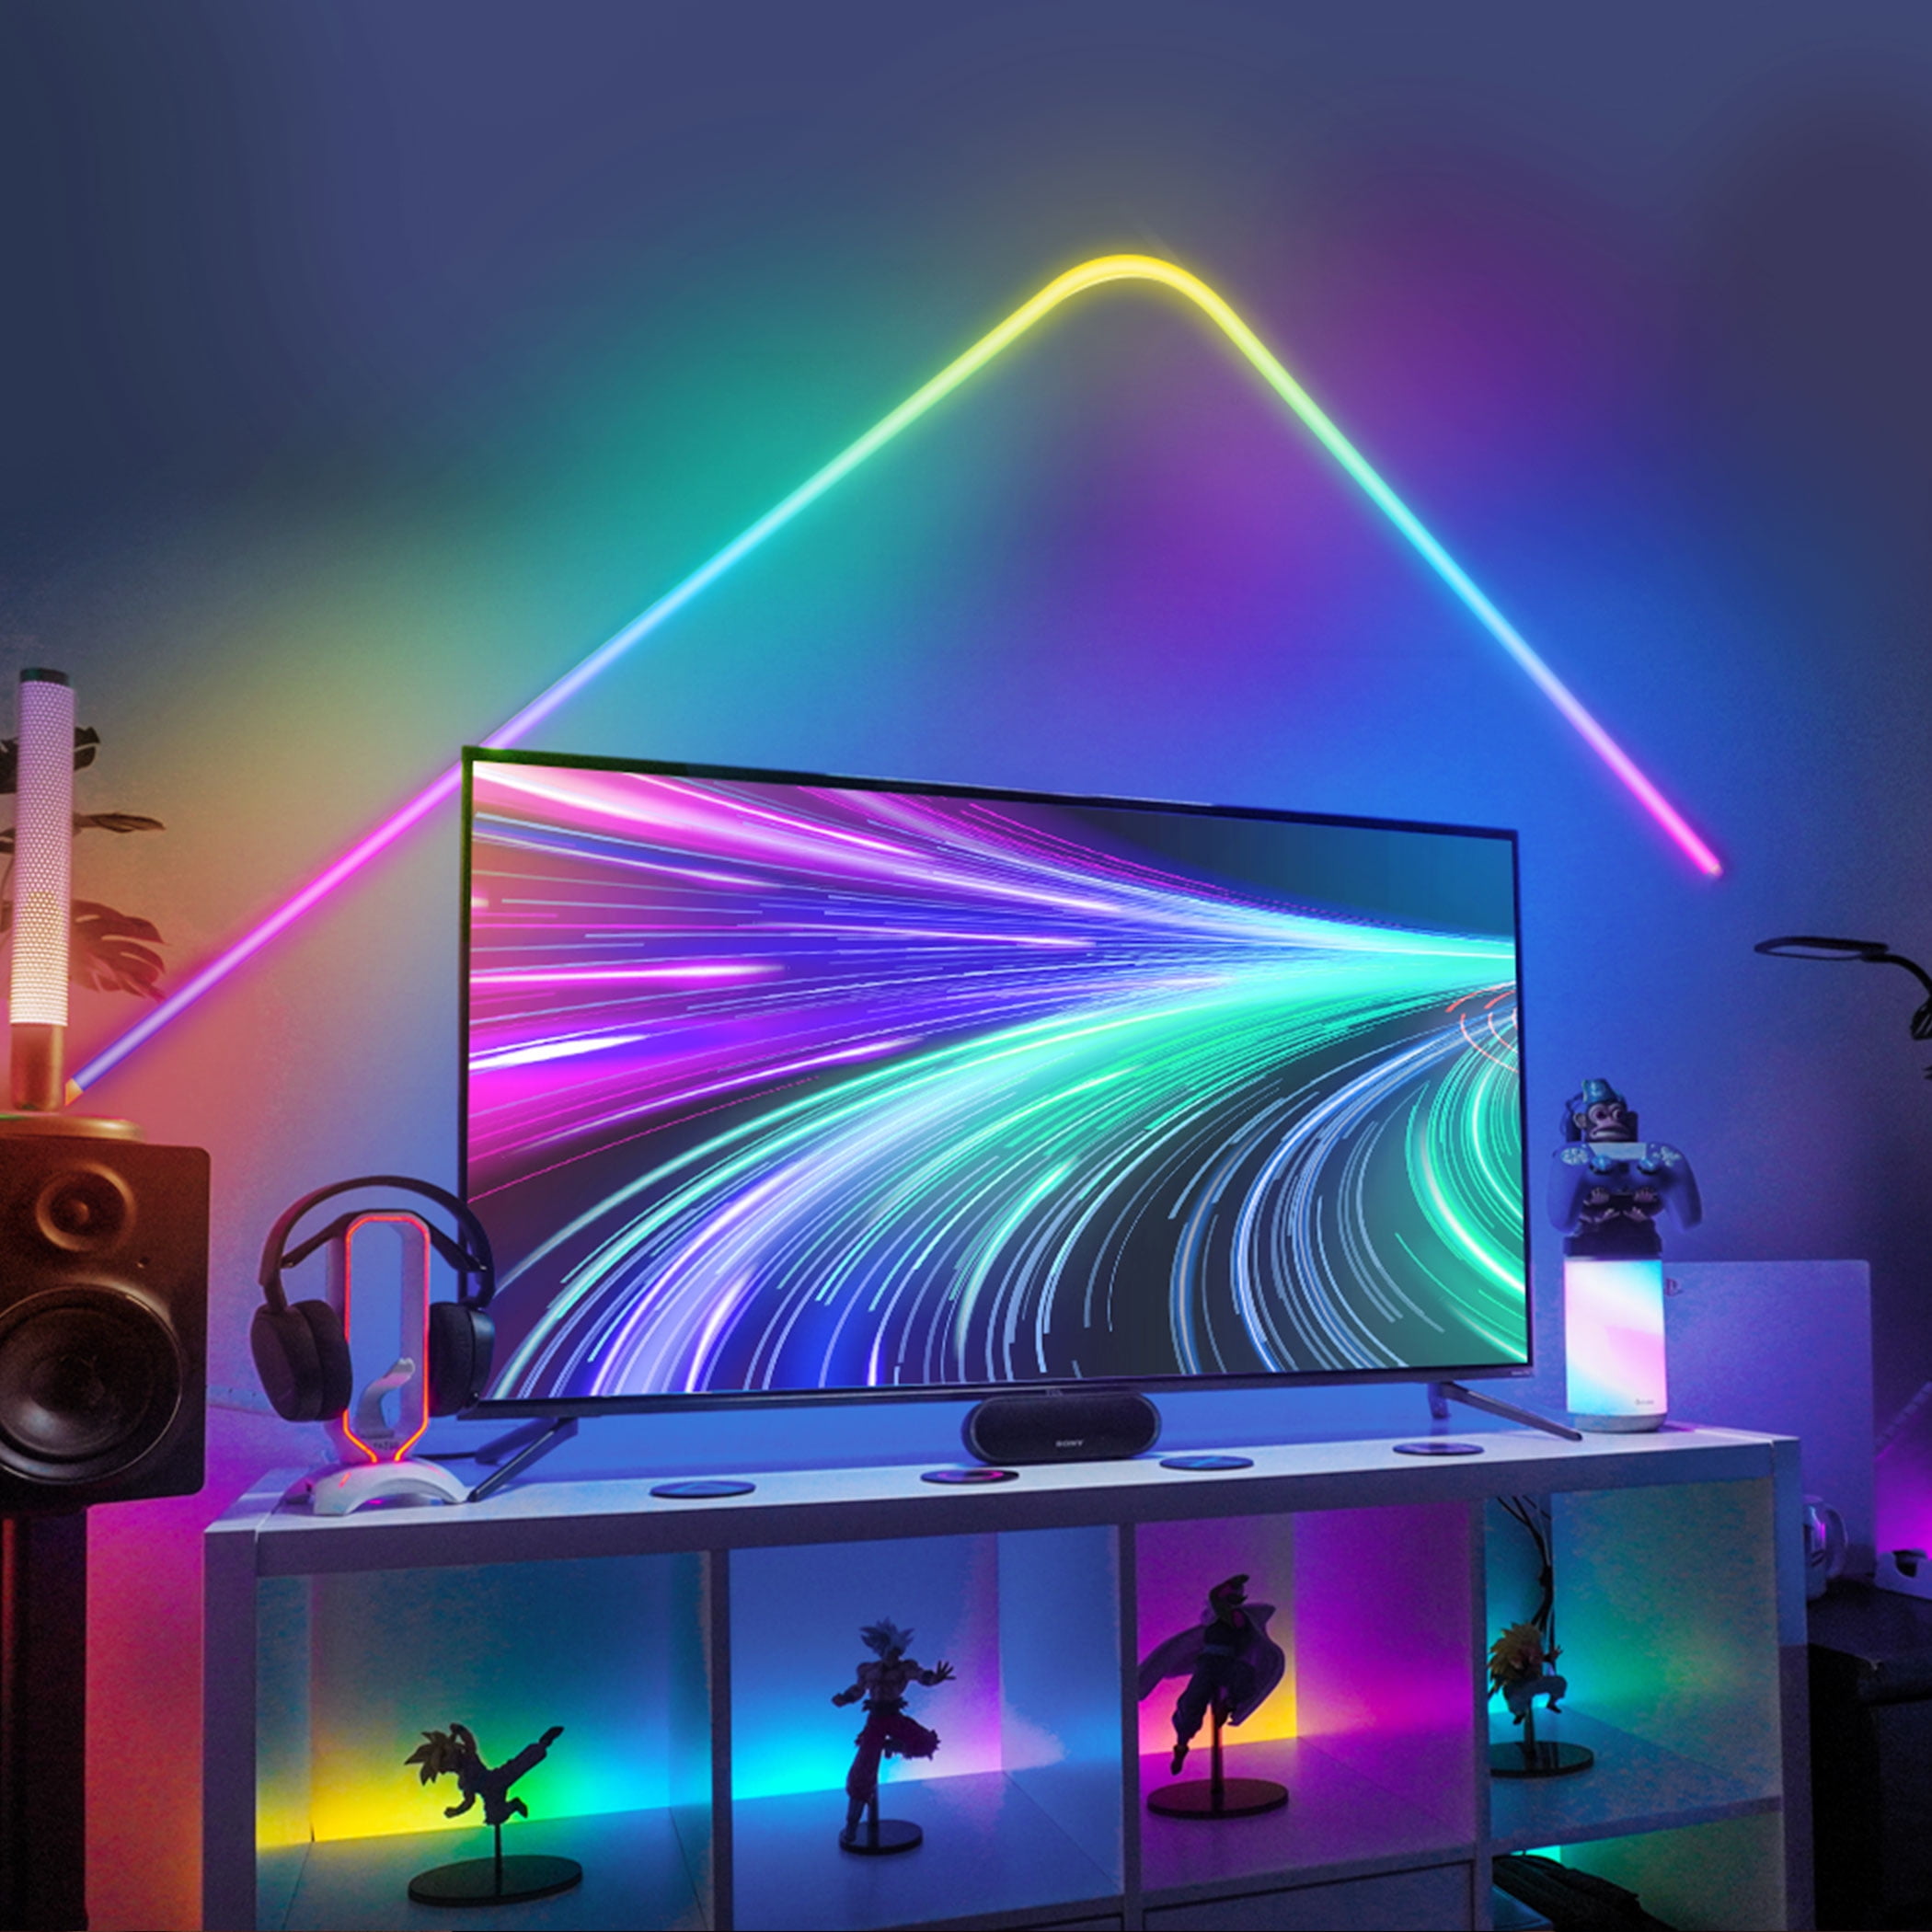 Govee Neon Strip Lights Provide Thrilling Home Experiences - Gearbrain